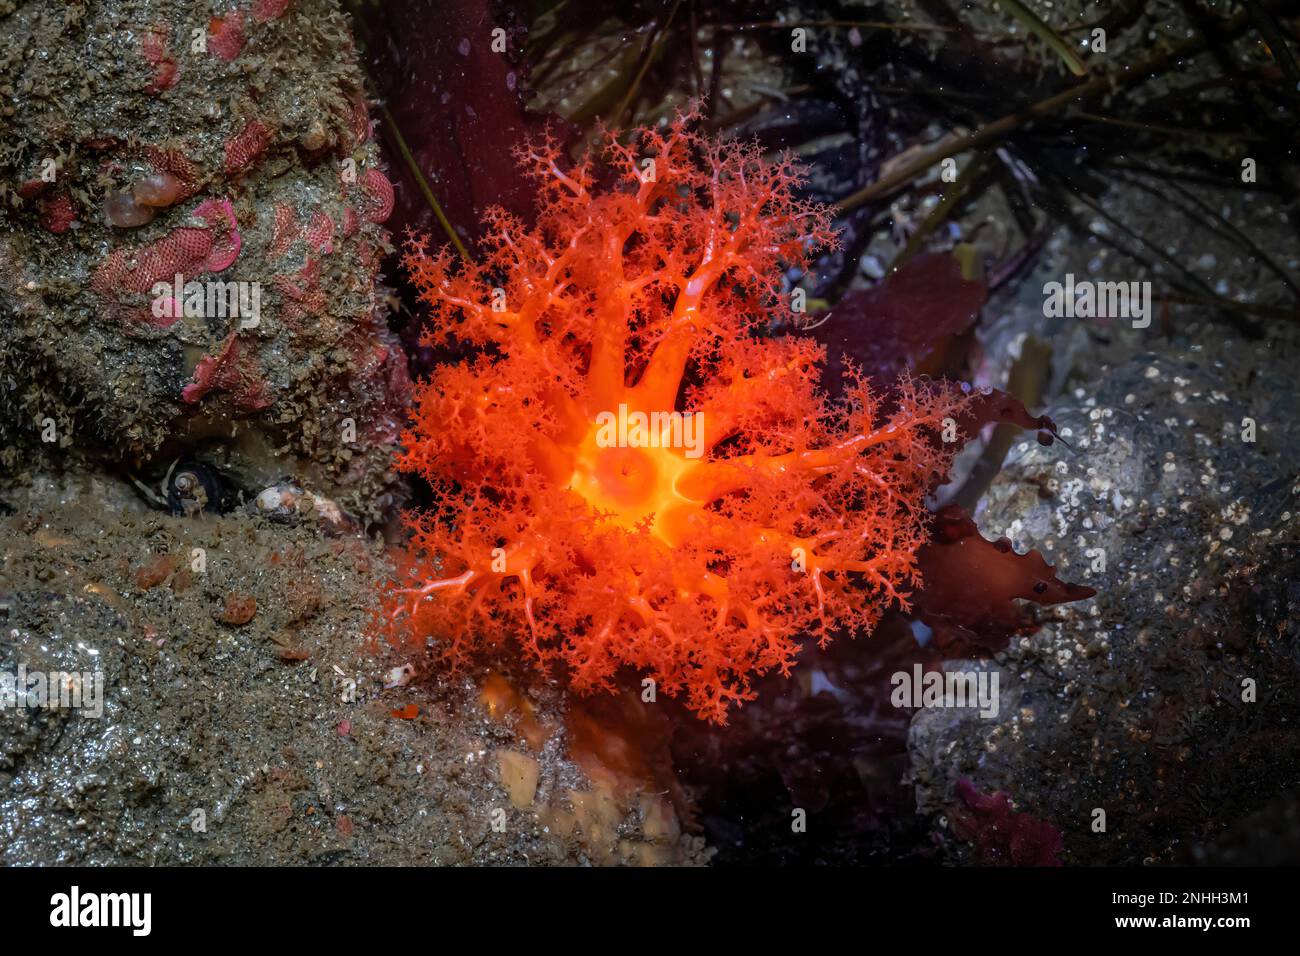 Red Sea Cucumber, Cucumaria miniata, at Point of Arches in Olympic National Park, Washington State, USA Stock Photo